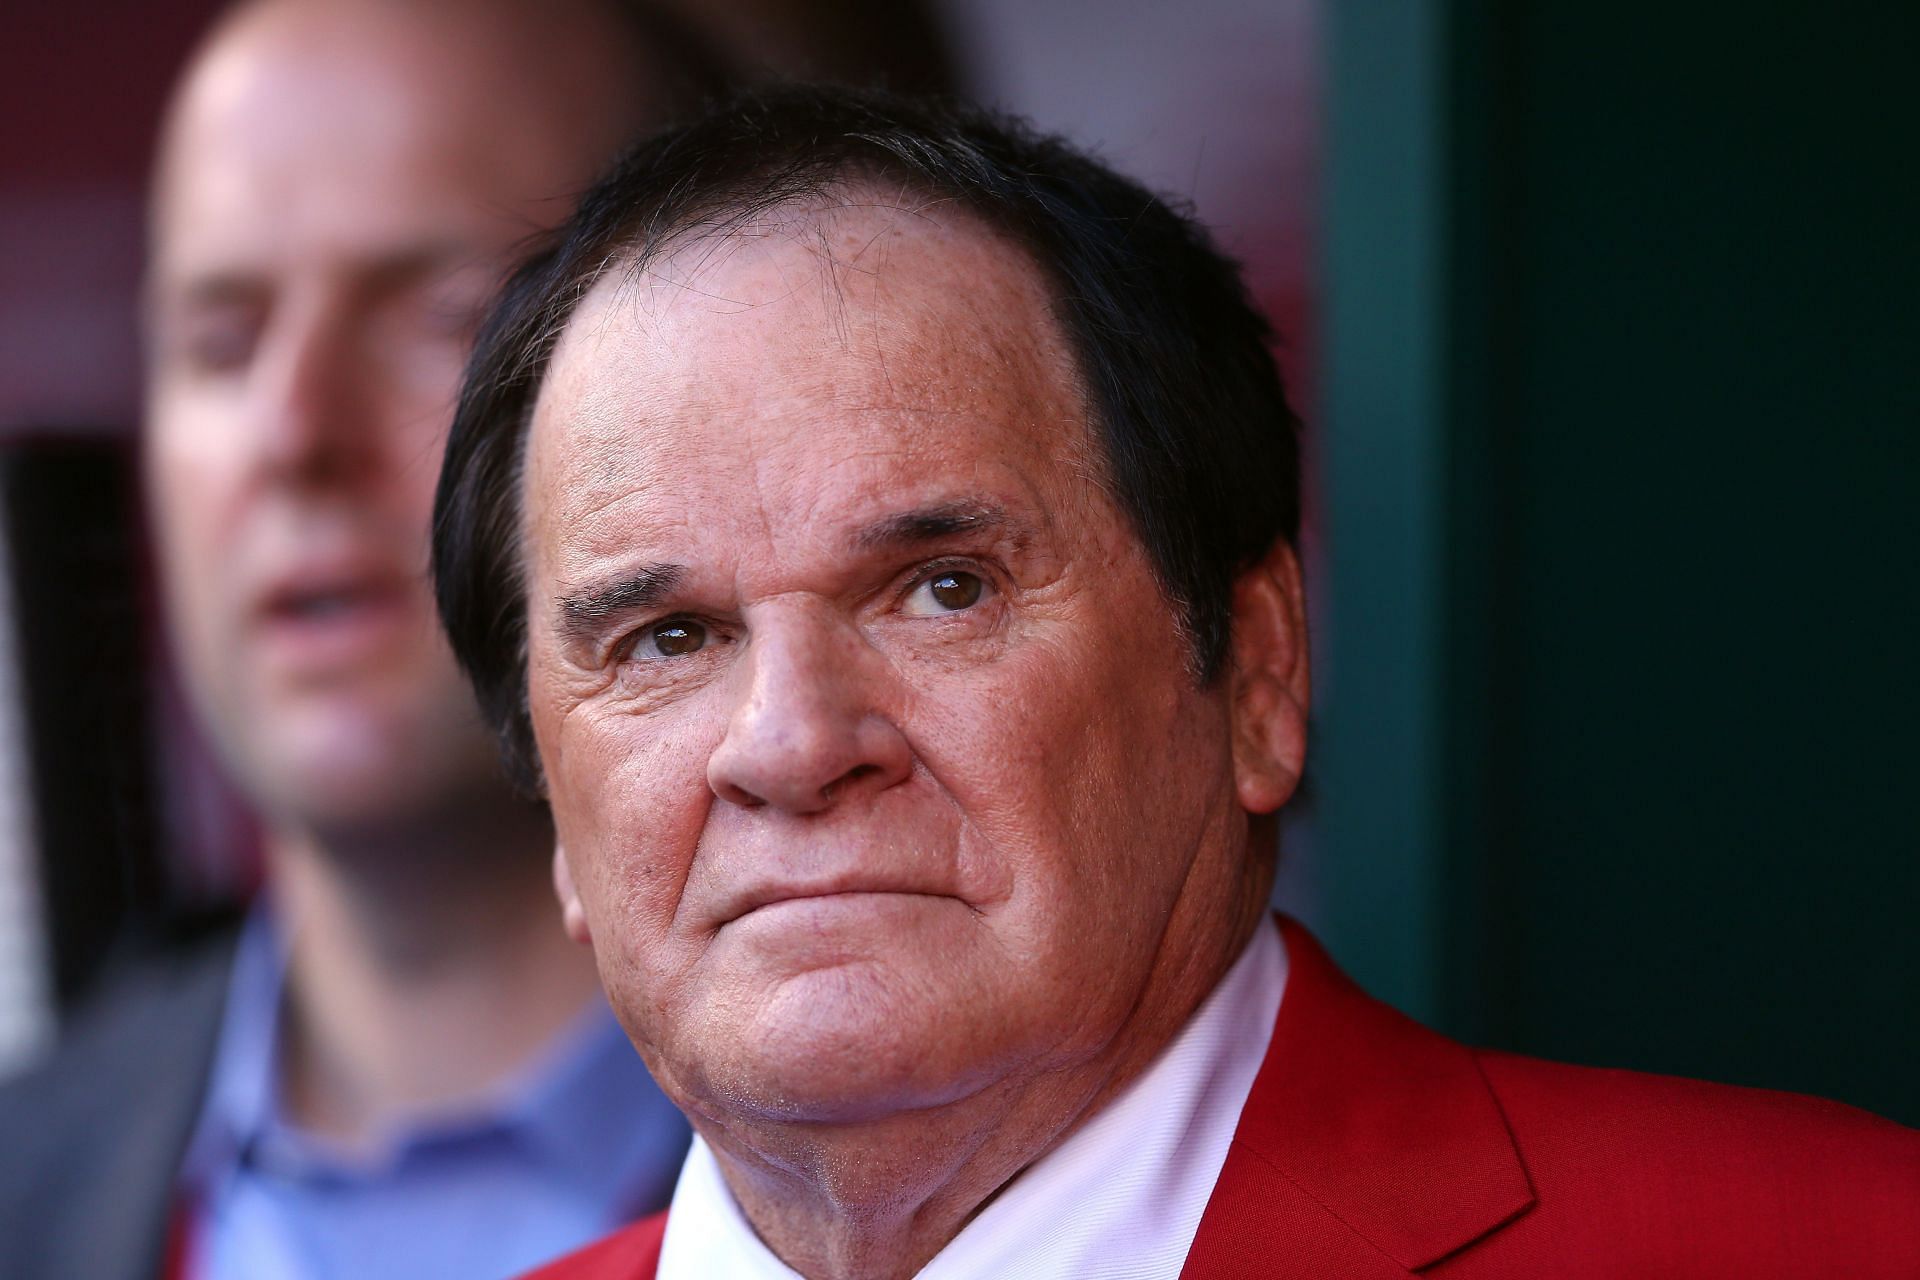 86th MLB All-Star Game: CINCINNATI, OH - JULY 14: Former player and manager Pete looks on prior to the 86th MLB All-Star Game at the Great American Ball Park on July 14, 2015, in Cincinnati, Ohio. (Photo by Elsa/Getty Images)